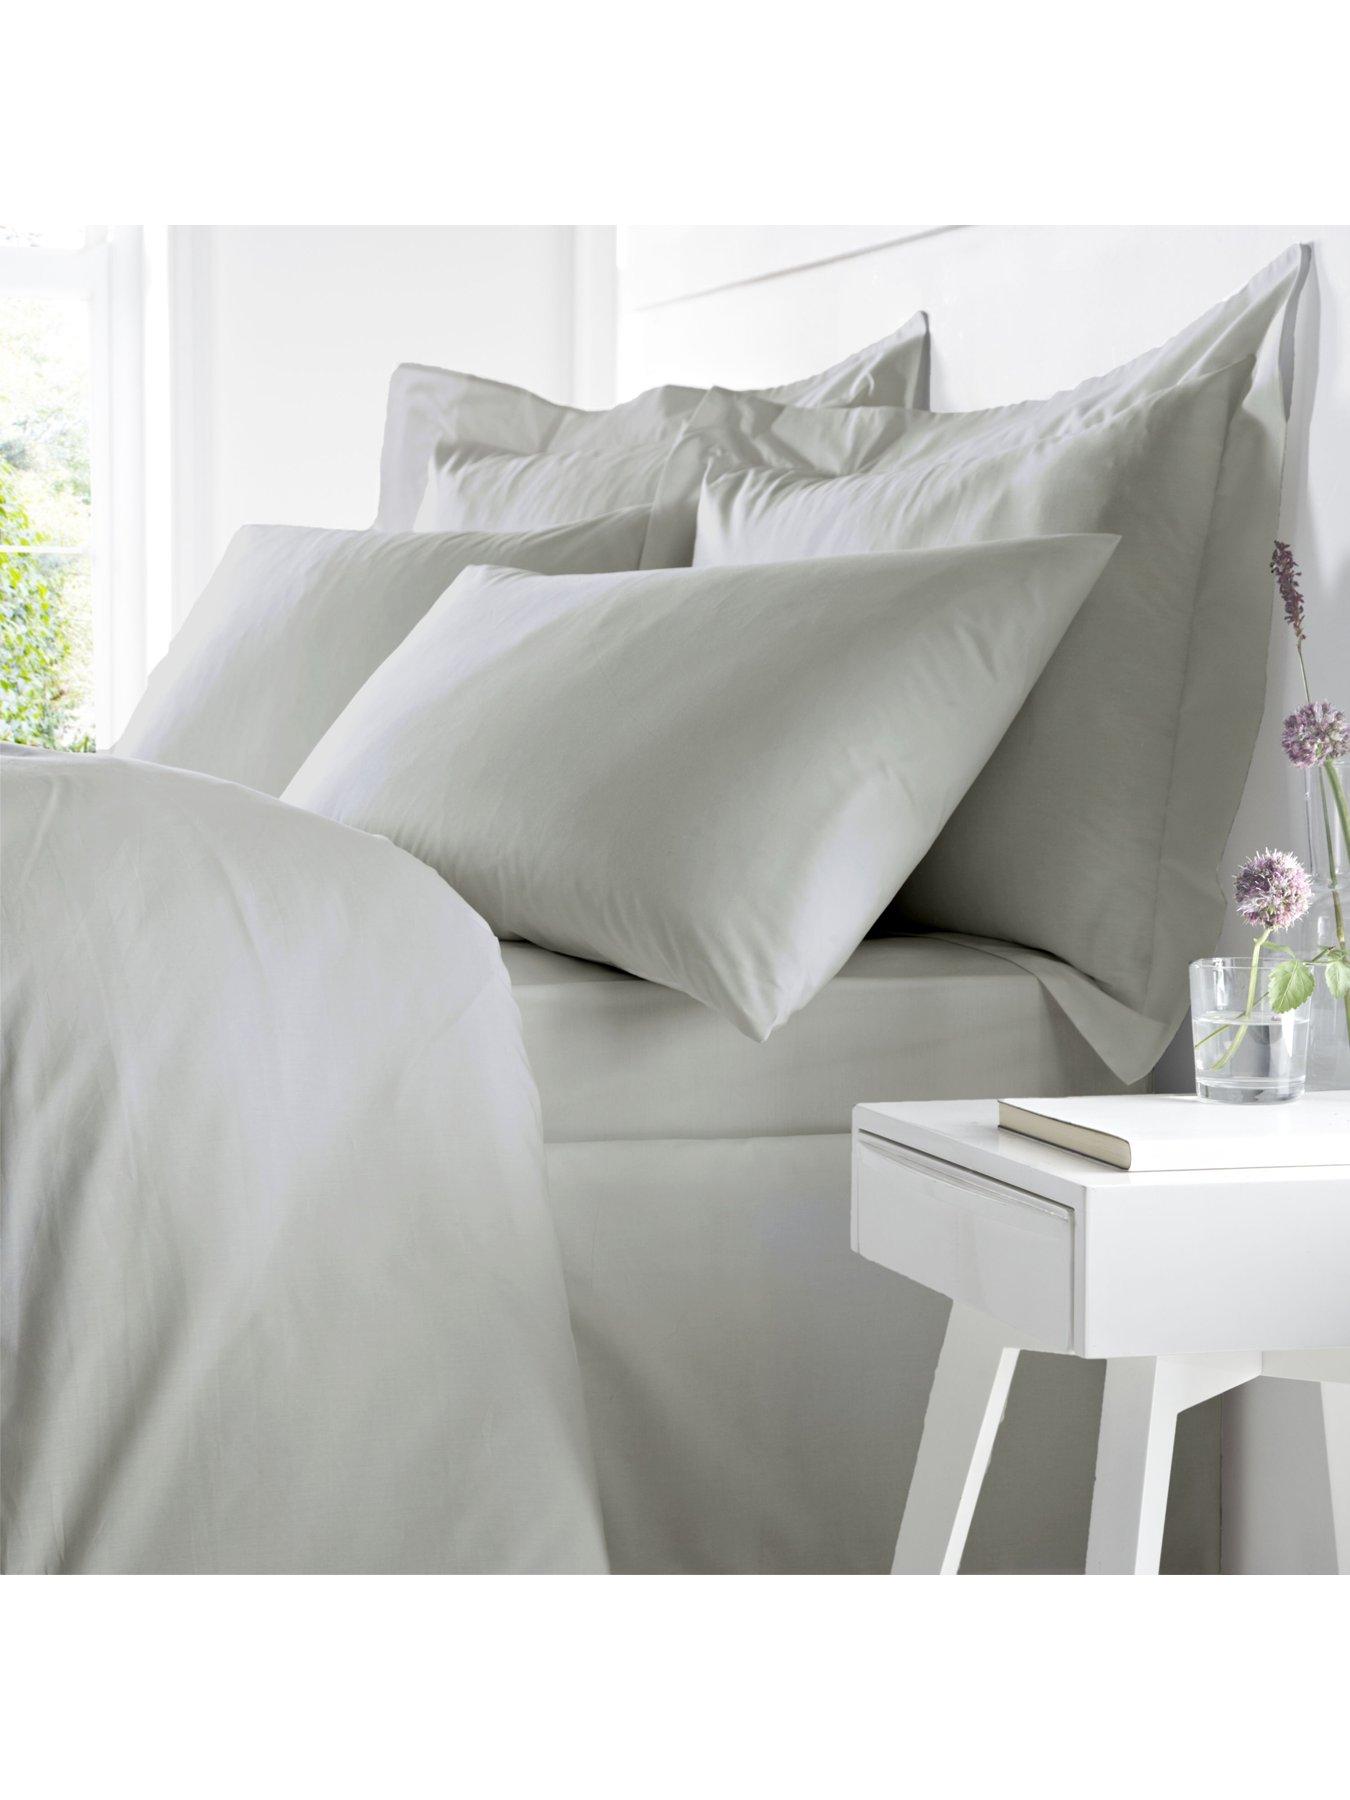 Details about   Egyptian Cotton 1000 TC Bedding Collection Egyptian Blue Solid Select Item&Size 